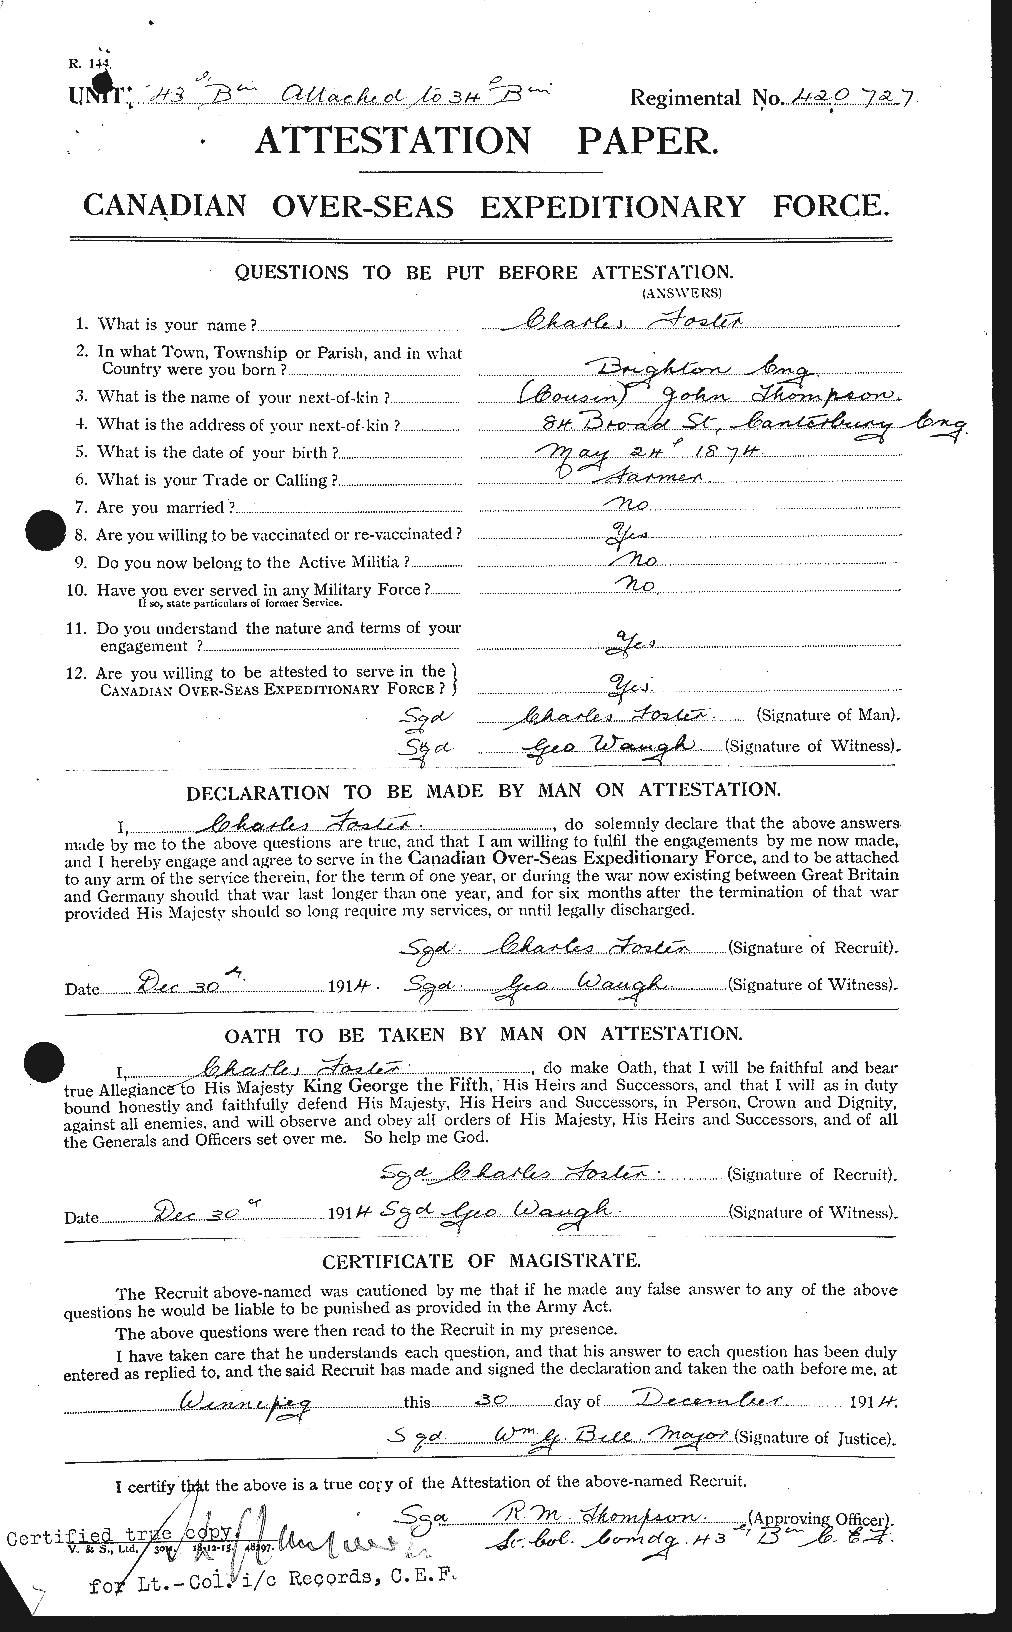 Personnel Records of the First World War - CEF 330499a